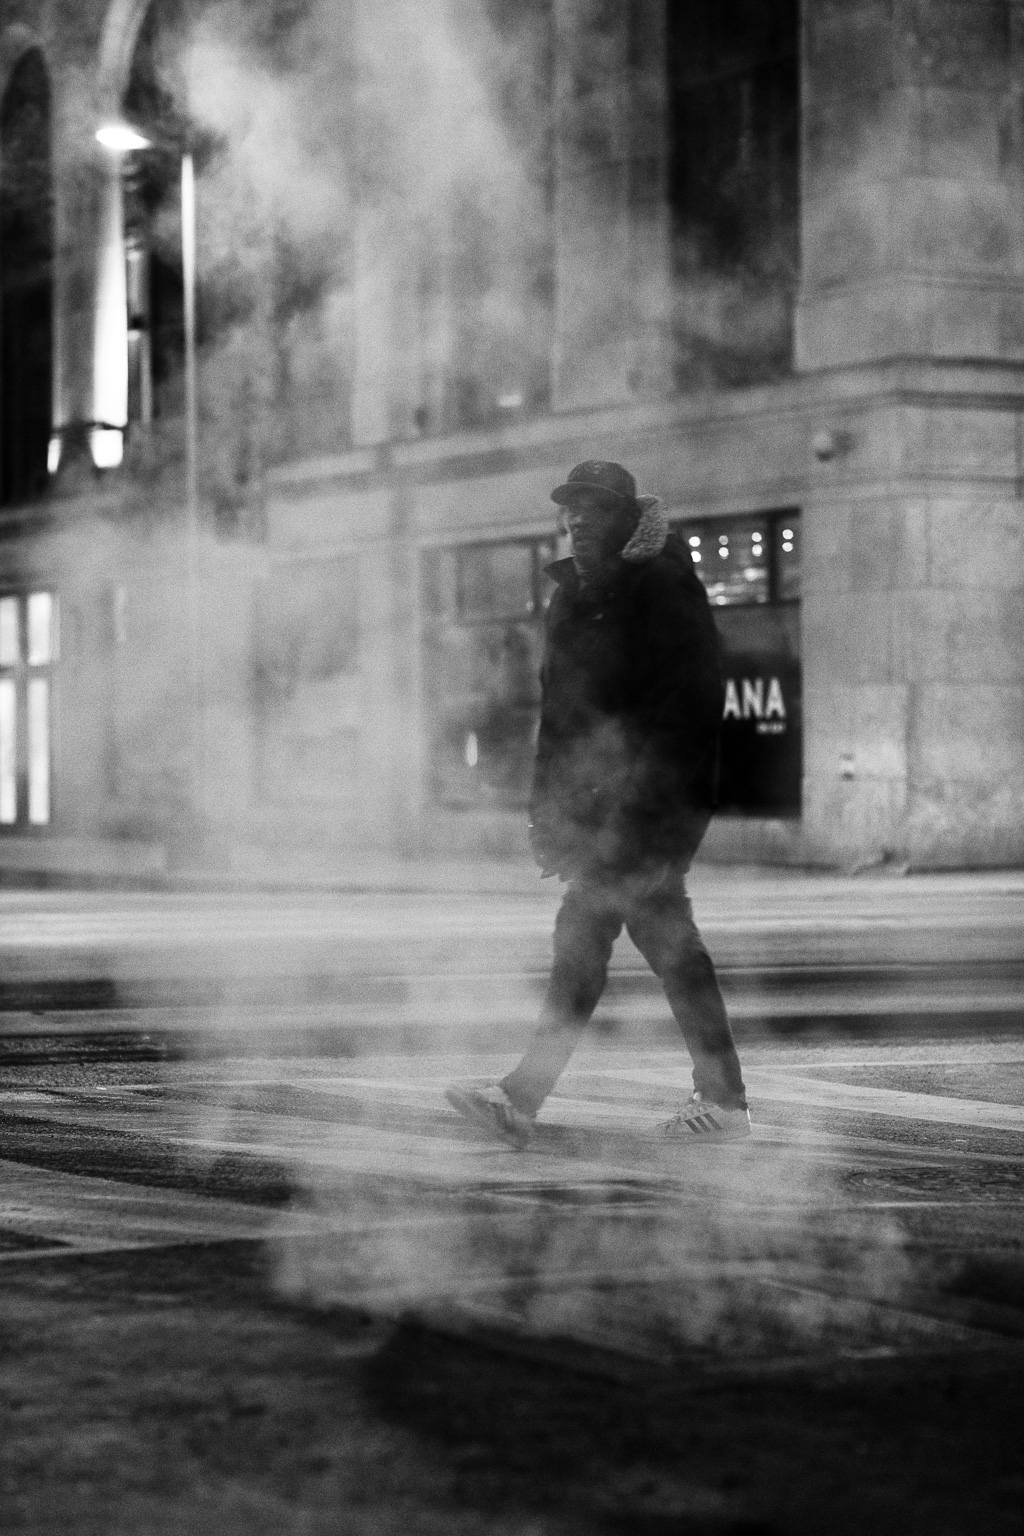 Man cross the street at night behind a steam vent.